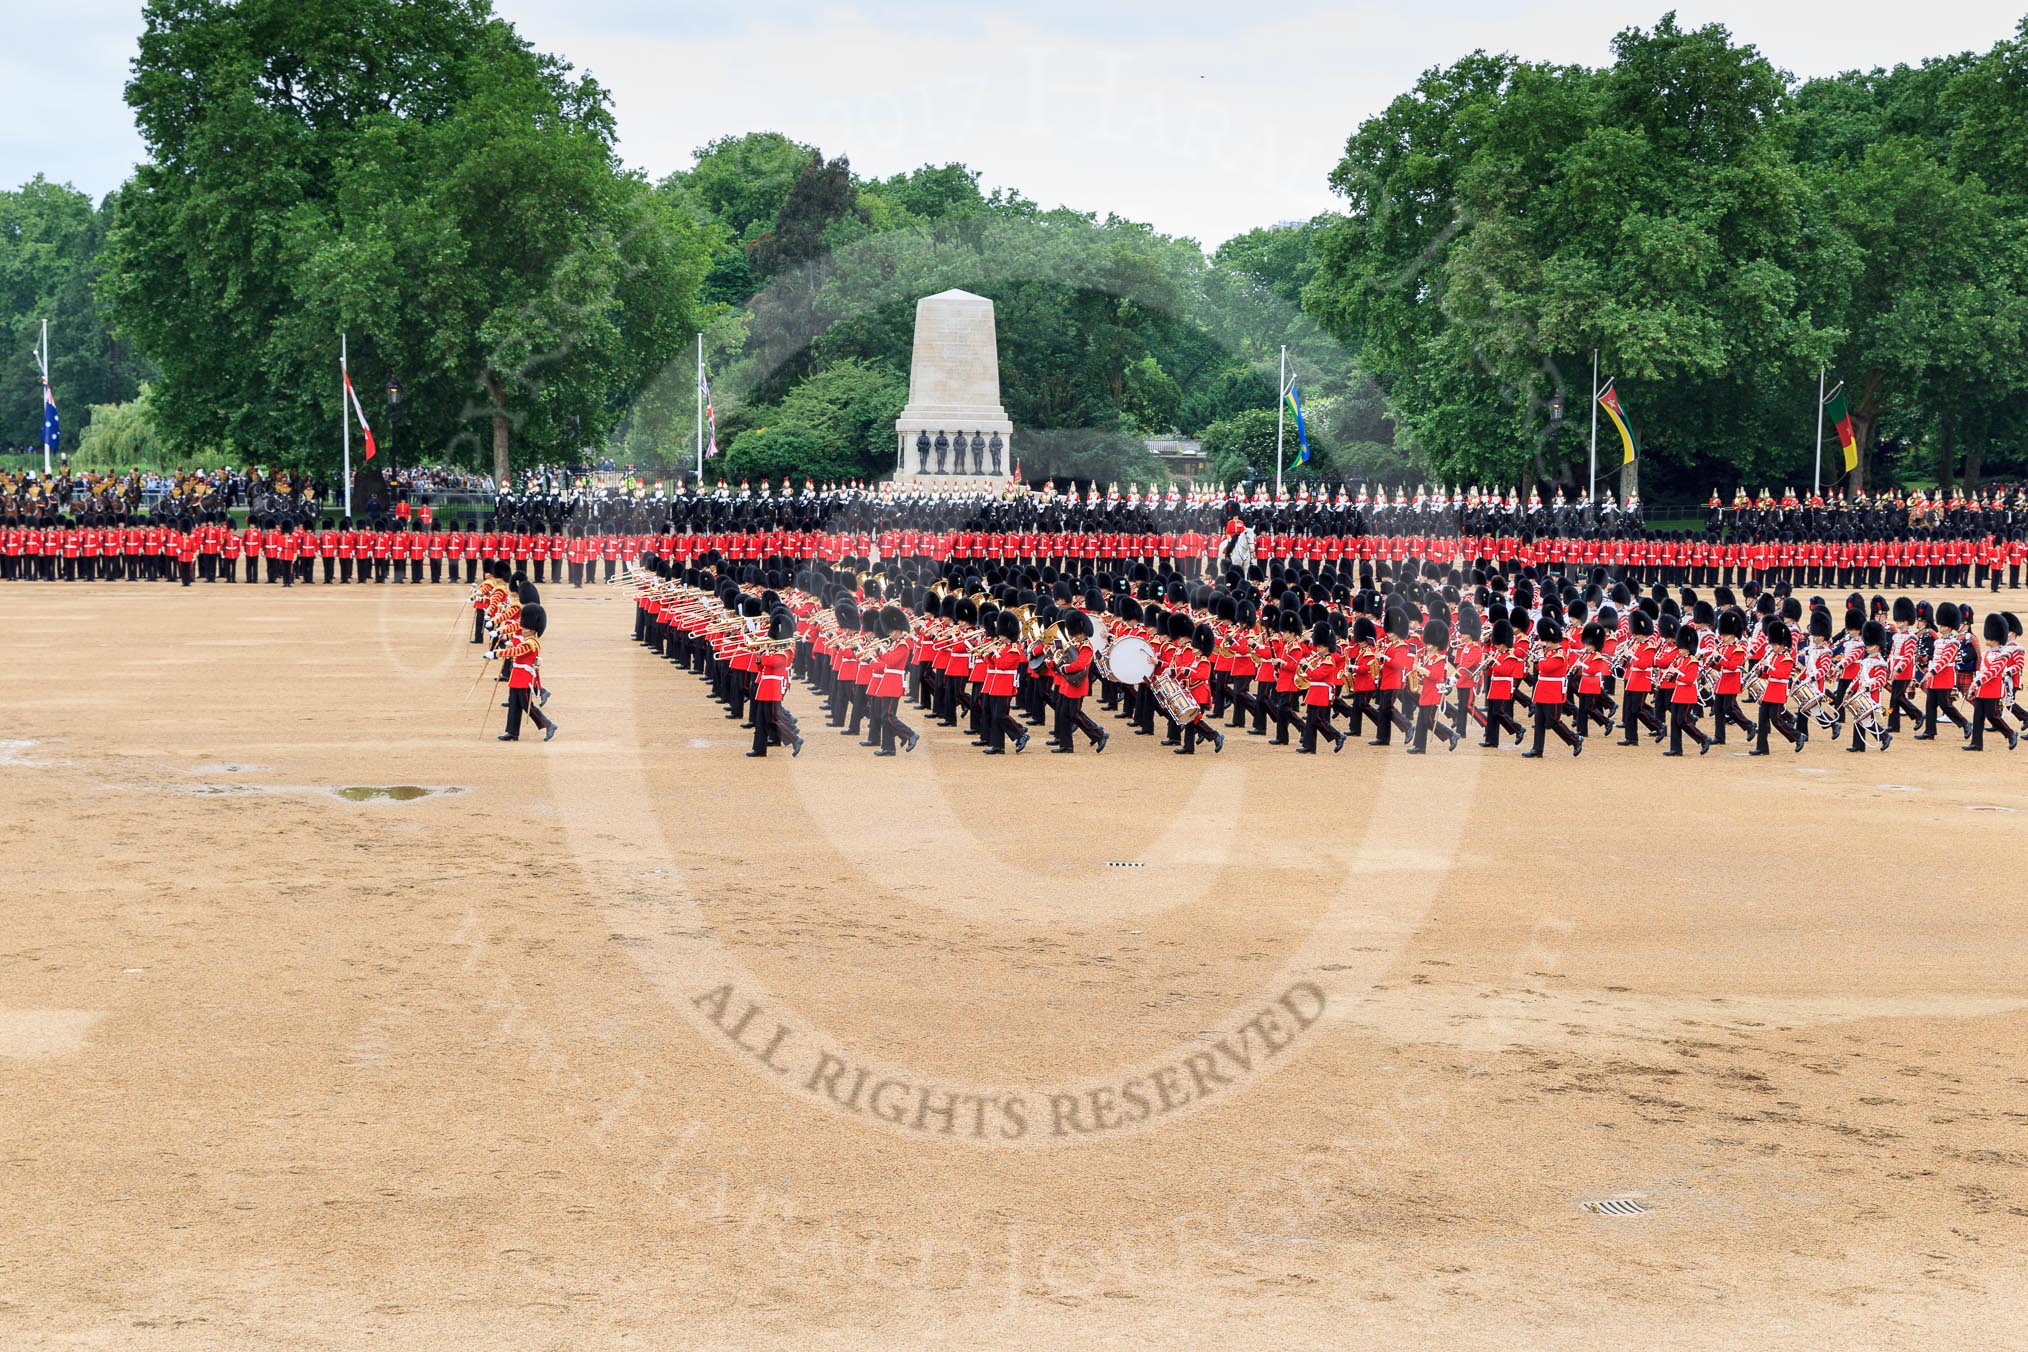 during The Colonel's Review {iptcyear4} (final rehearsal for Trooping the Colour, The Queen's Birthday Parade)  at Horse Guards Parade, Westminster, London, 2 June 2018, 11:12.